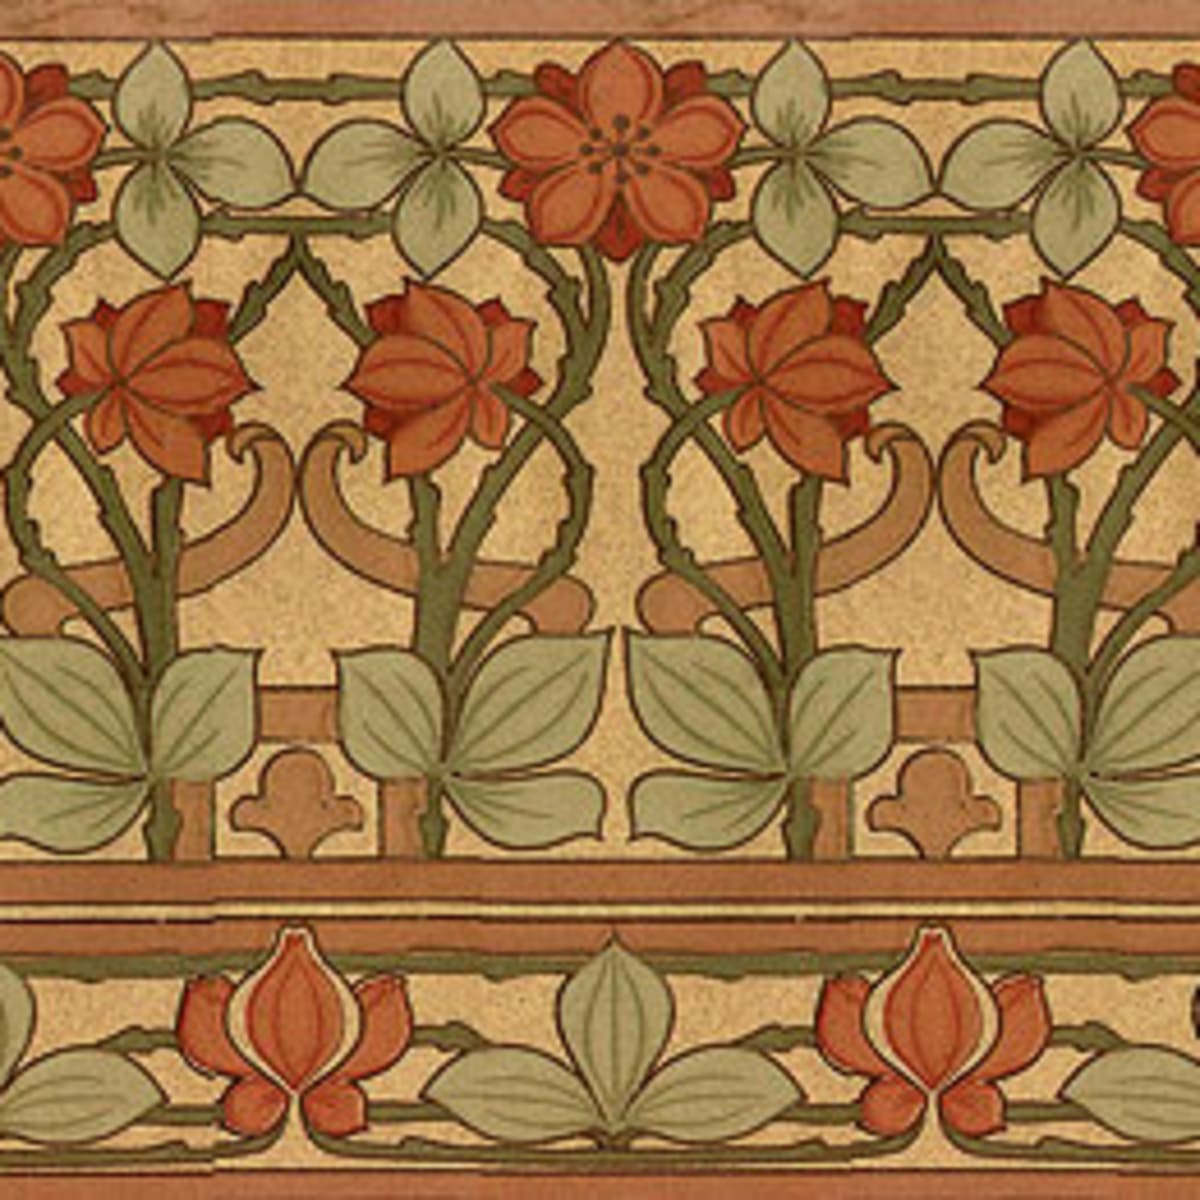 Arts & Crafts Revival Wallpaper and Paint Products for the Arts & Crafts House. Arts & Crafts Homes Online